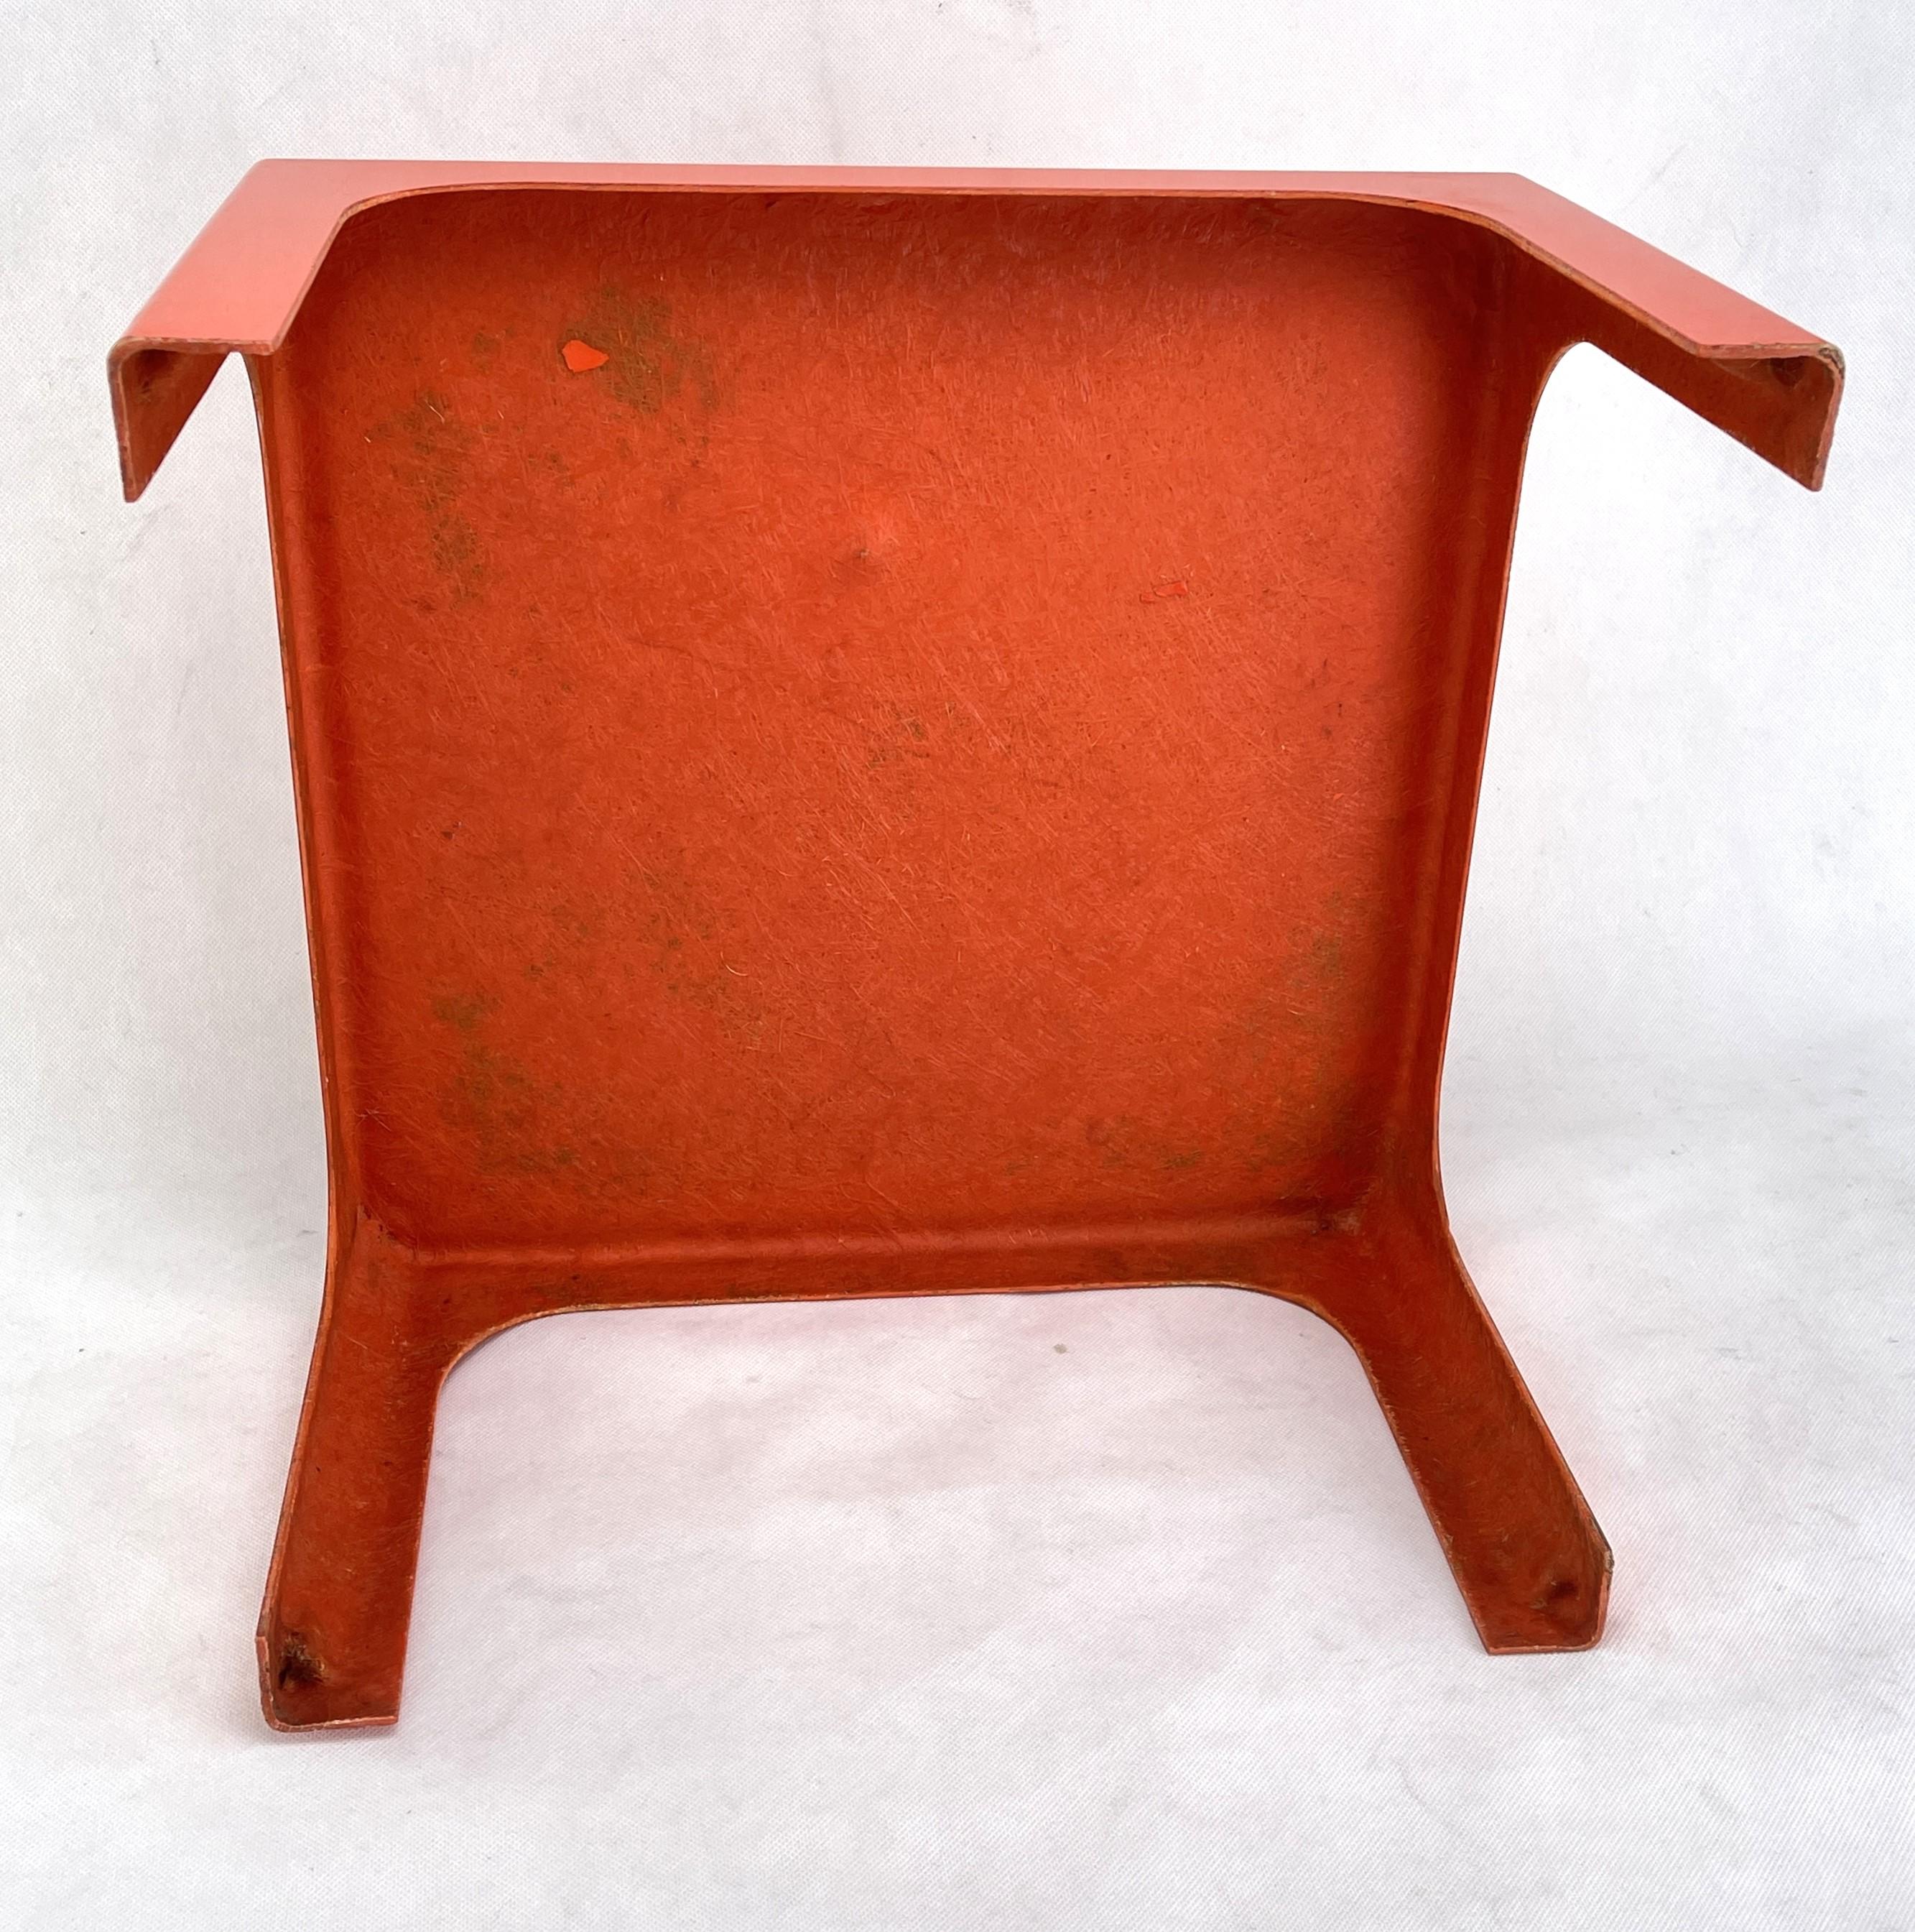 Square fiberglass side table in orange, 1970s

The table has a simple, elegant modern shape. It is made entirely of orange fiberglass.

The cleaned item weights 1.75 kg / 3.86 lbs.